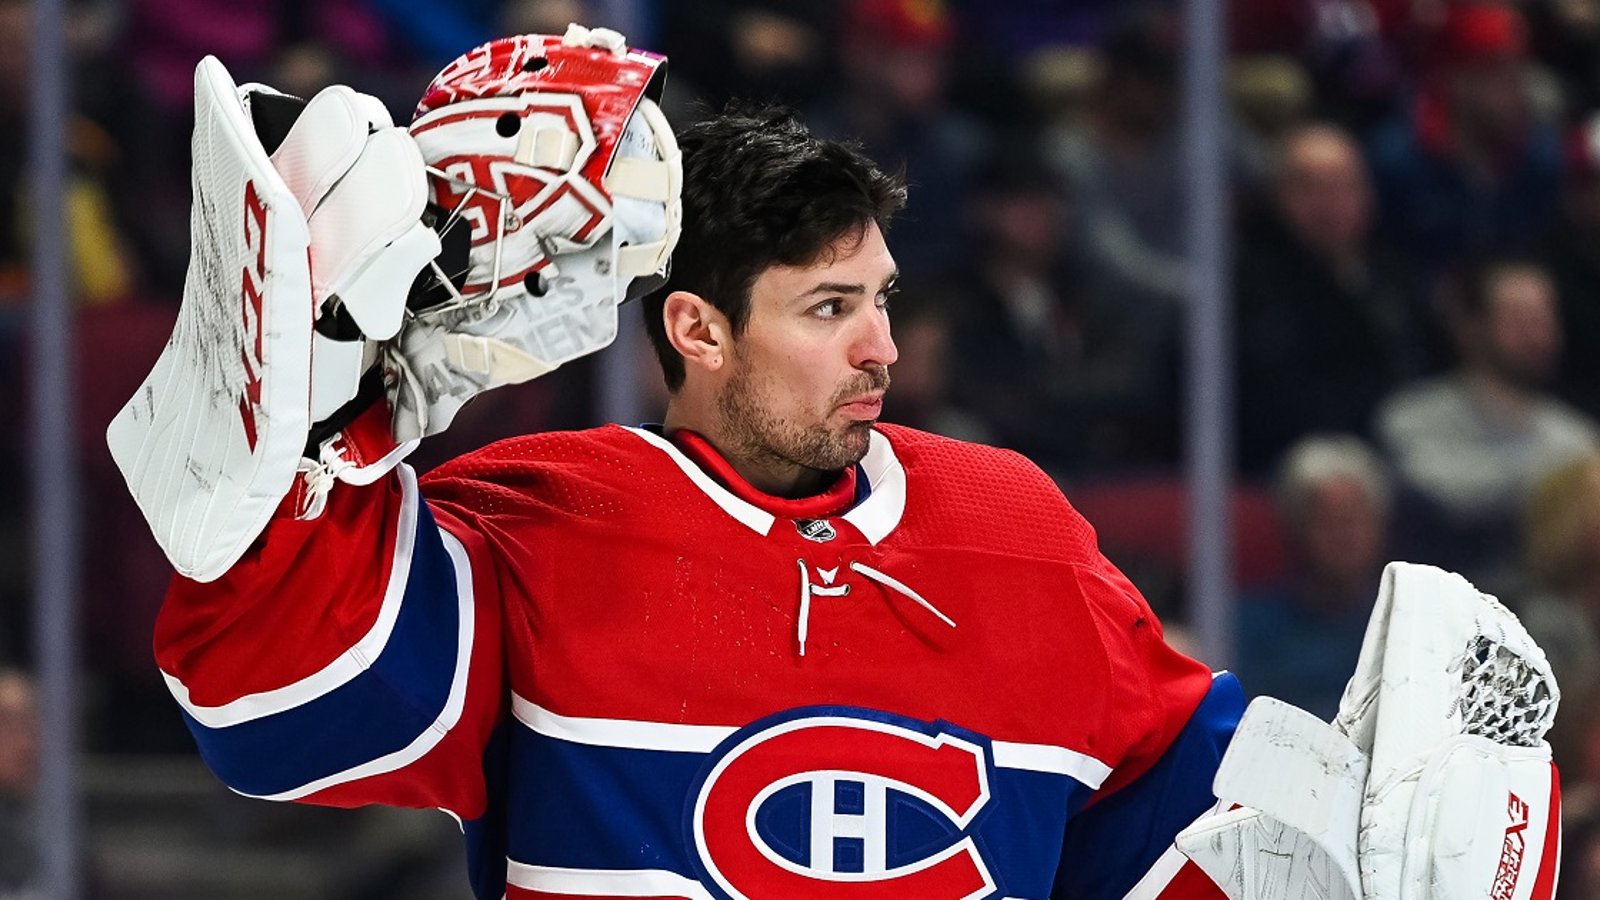 Carey Price dealing with 2 injuries, may not be ready to start the season.